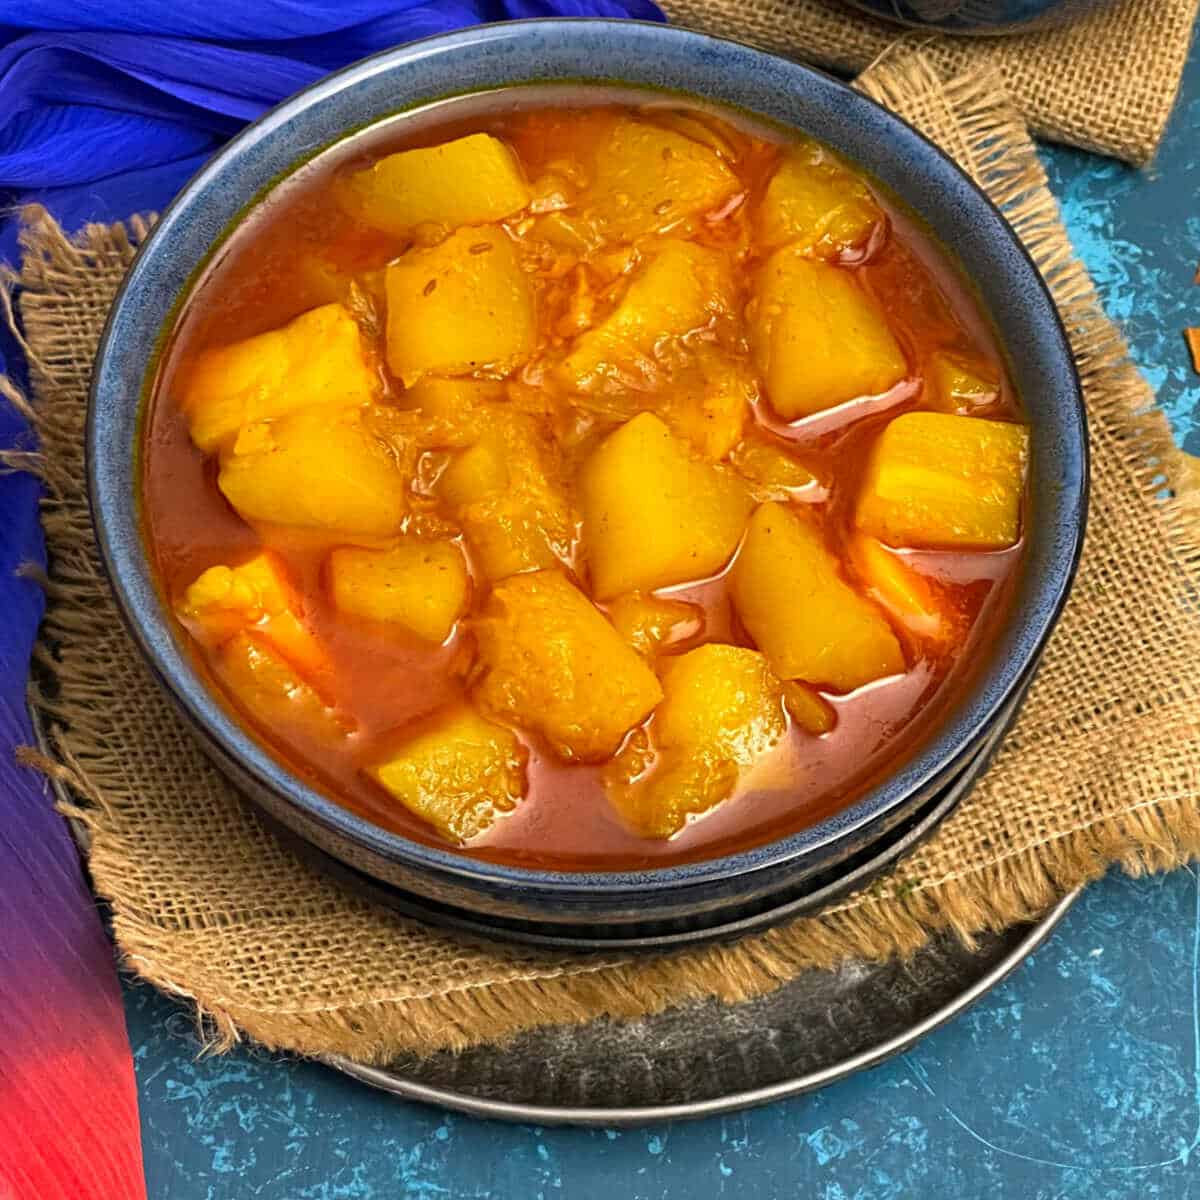 Papaya potato curry placed in a blue bowl.